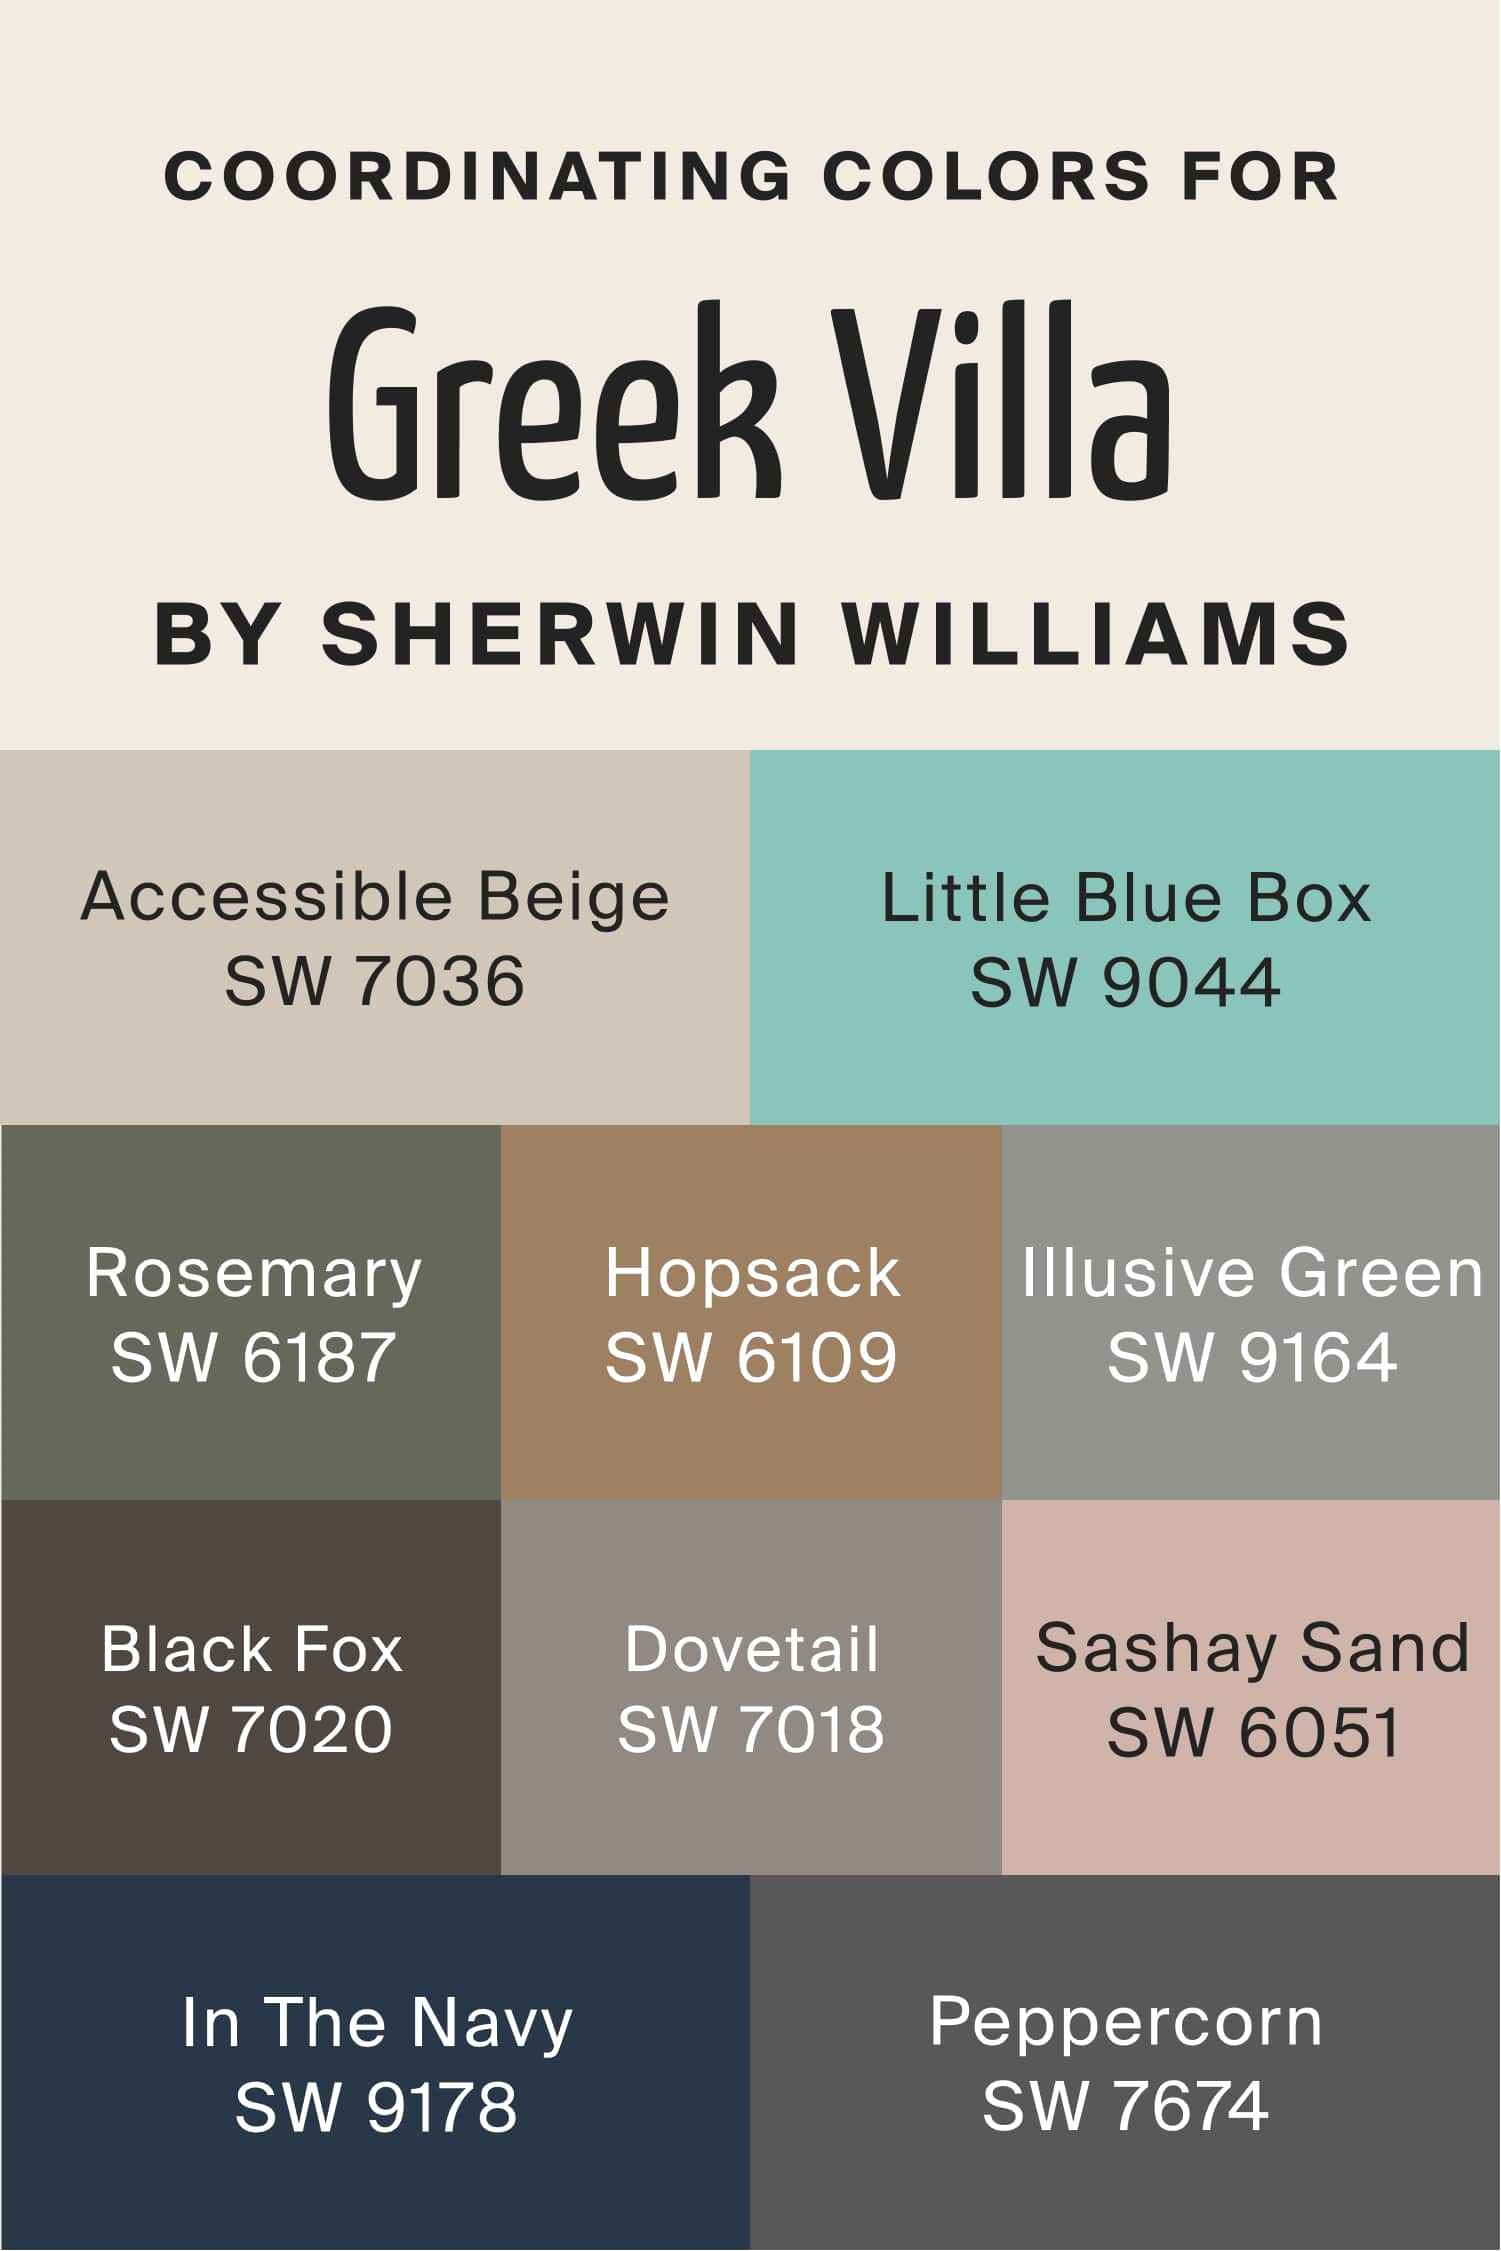 Coordinating Colors for Greek Villа by Sherwin Williams